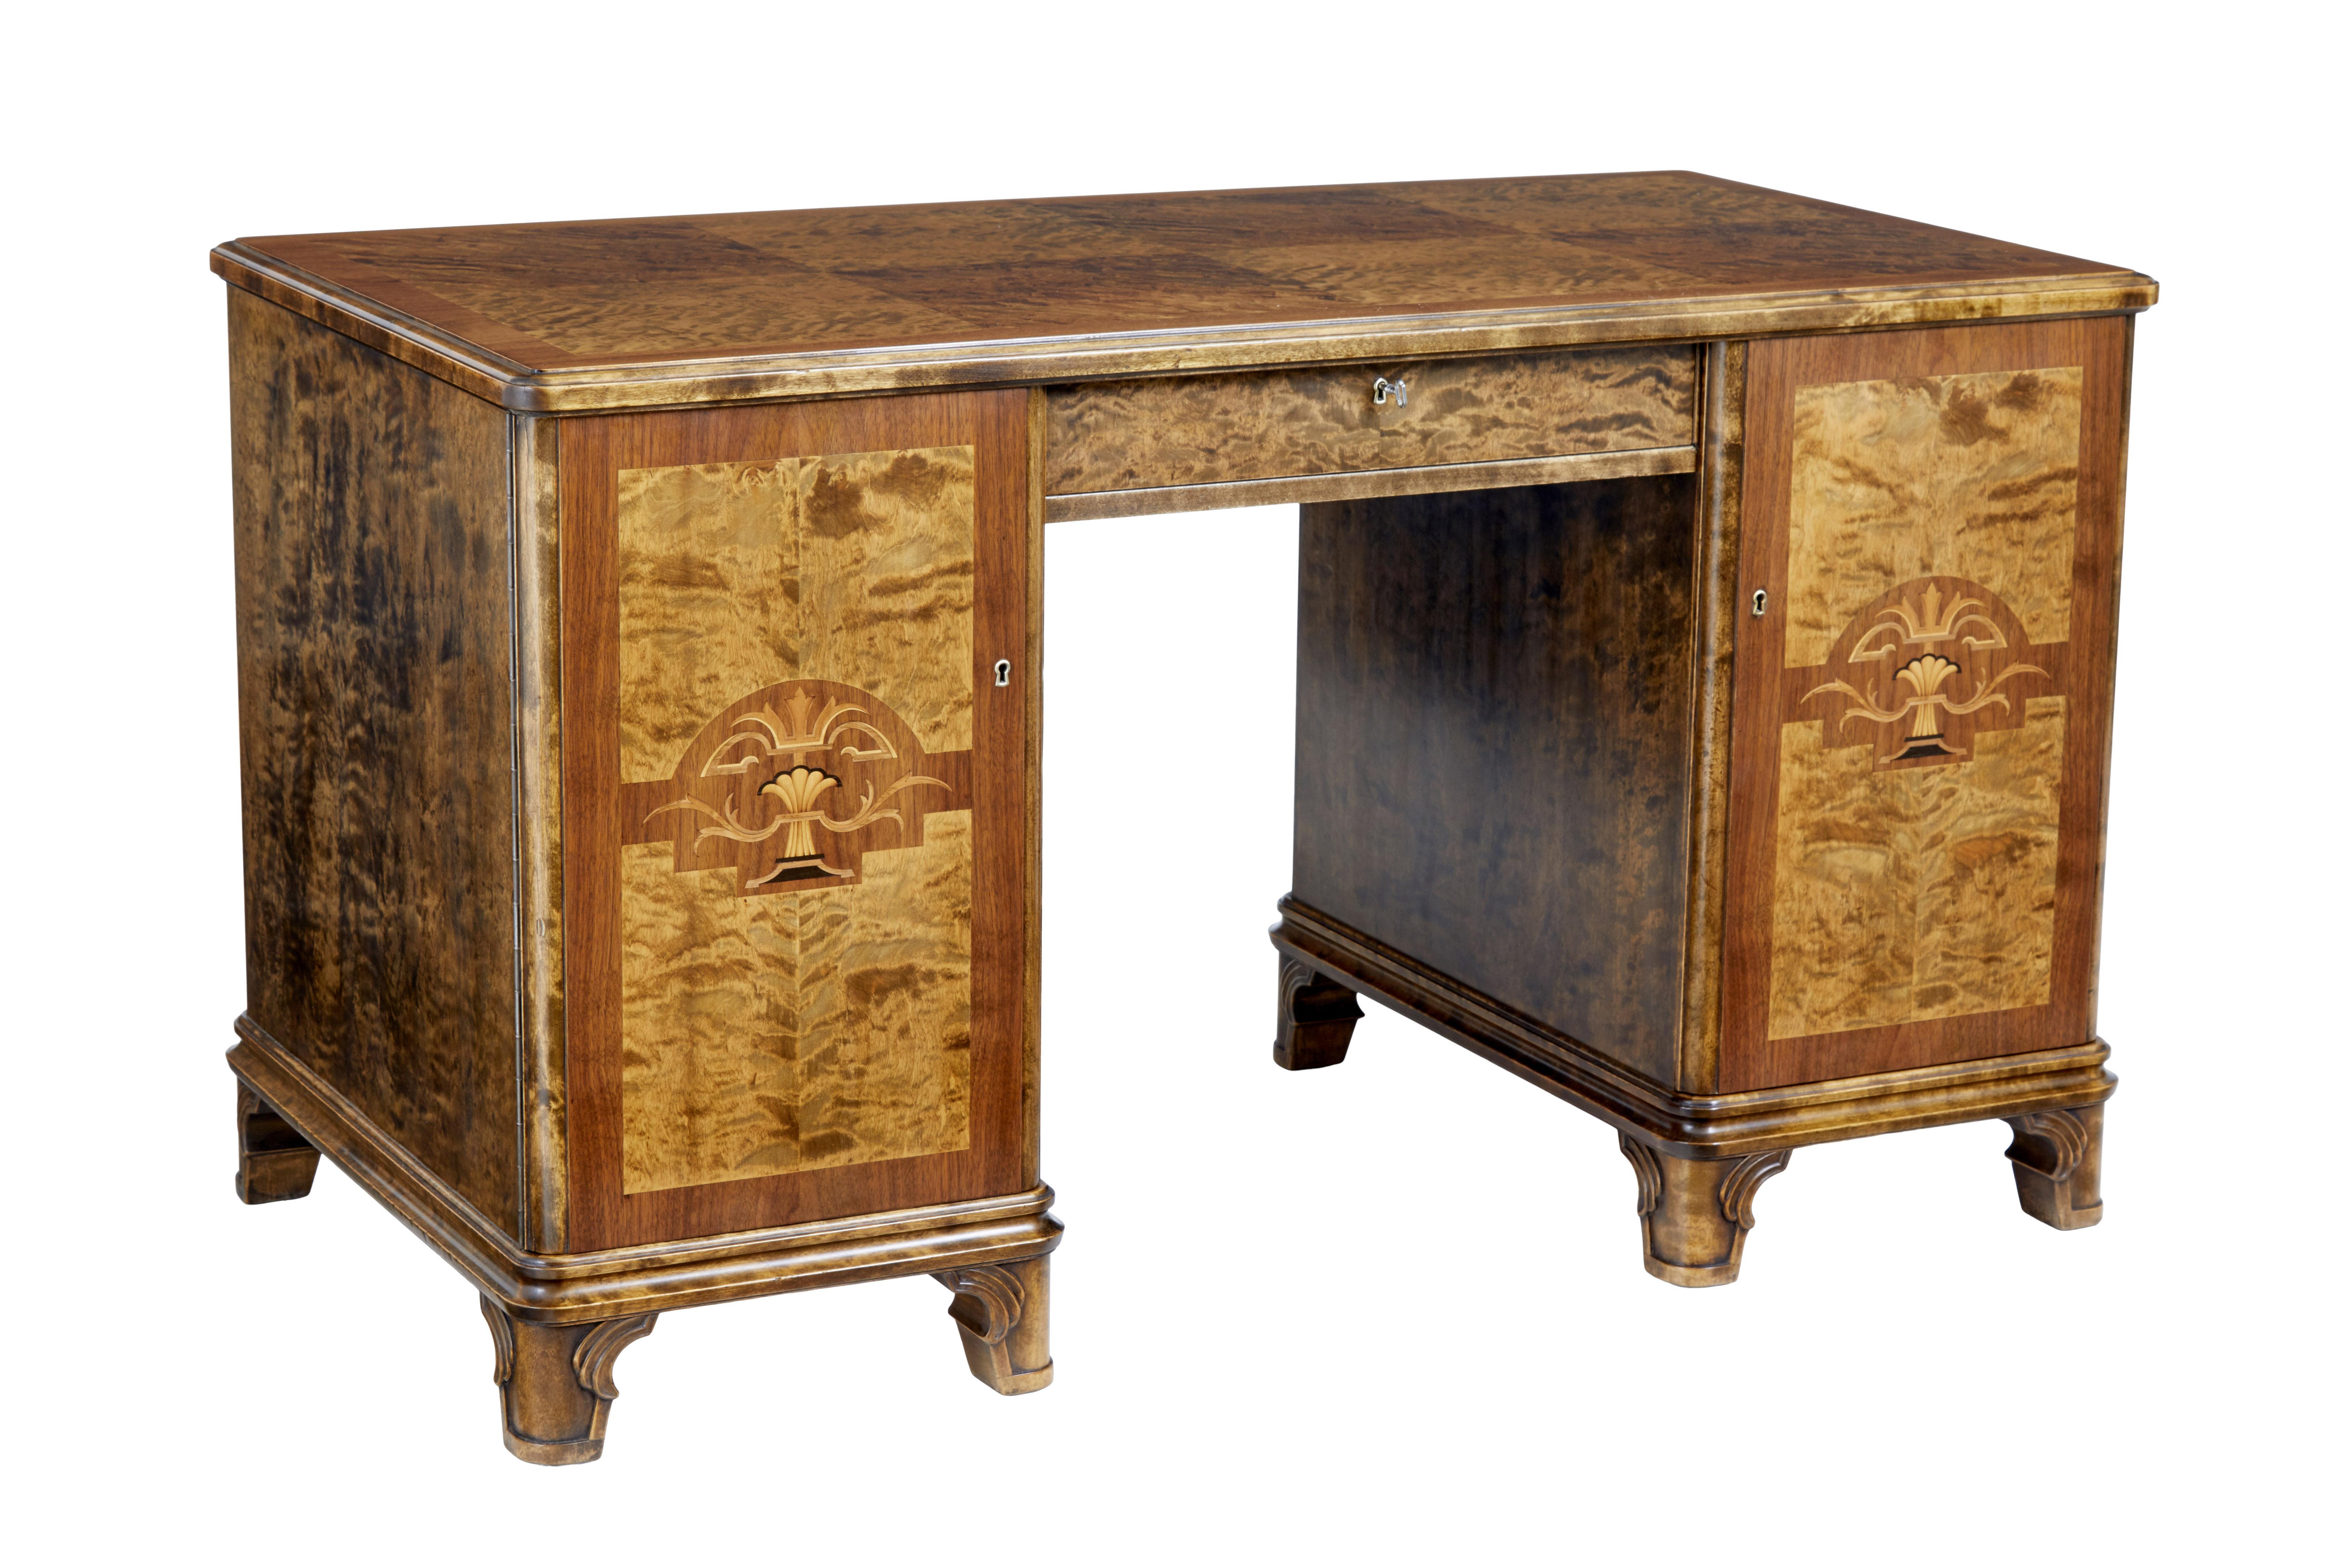 Mid 20th century Swedish birch inlaid pedestal desk, circa 1940.

Fine quality 1 piece art deco inspired Swedish made desk. Writing surface with arranged burr birch matched veneers surrounded by a walnut border. Single drawer above the knee with